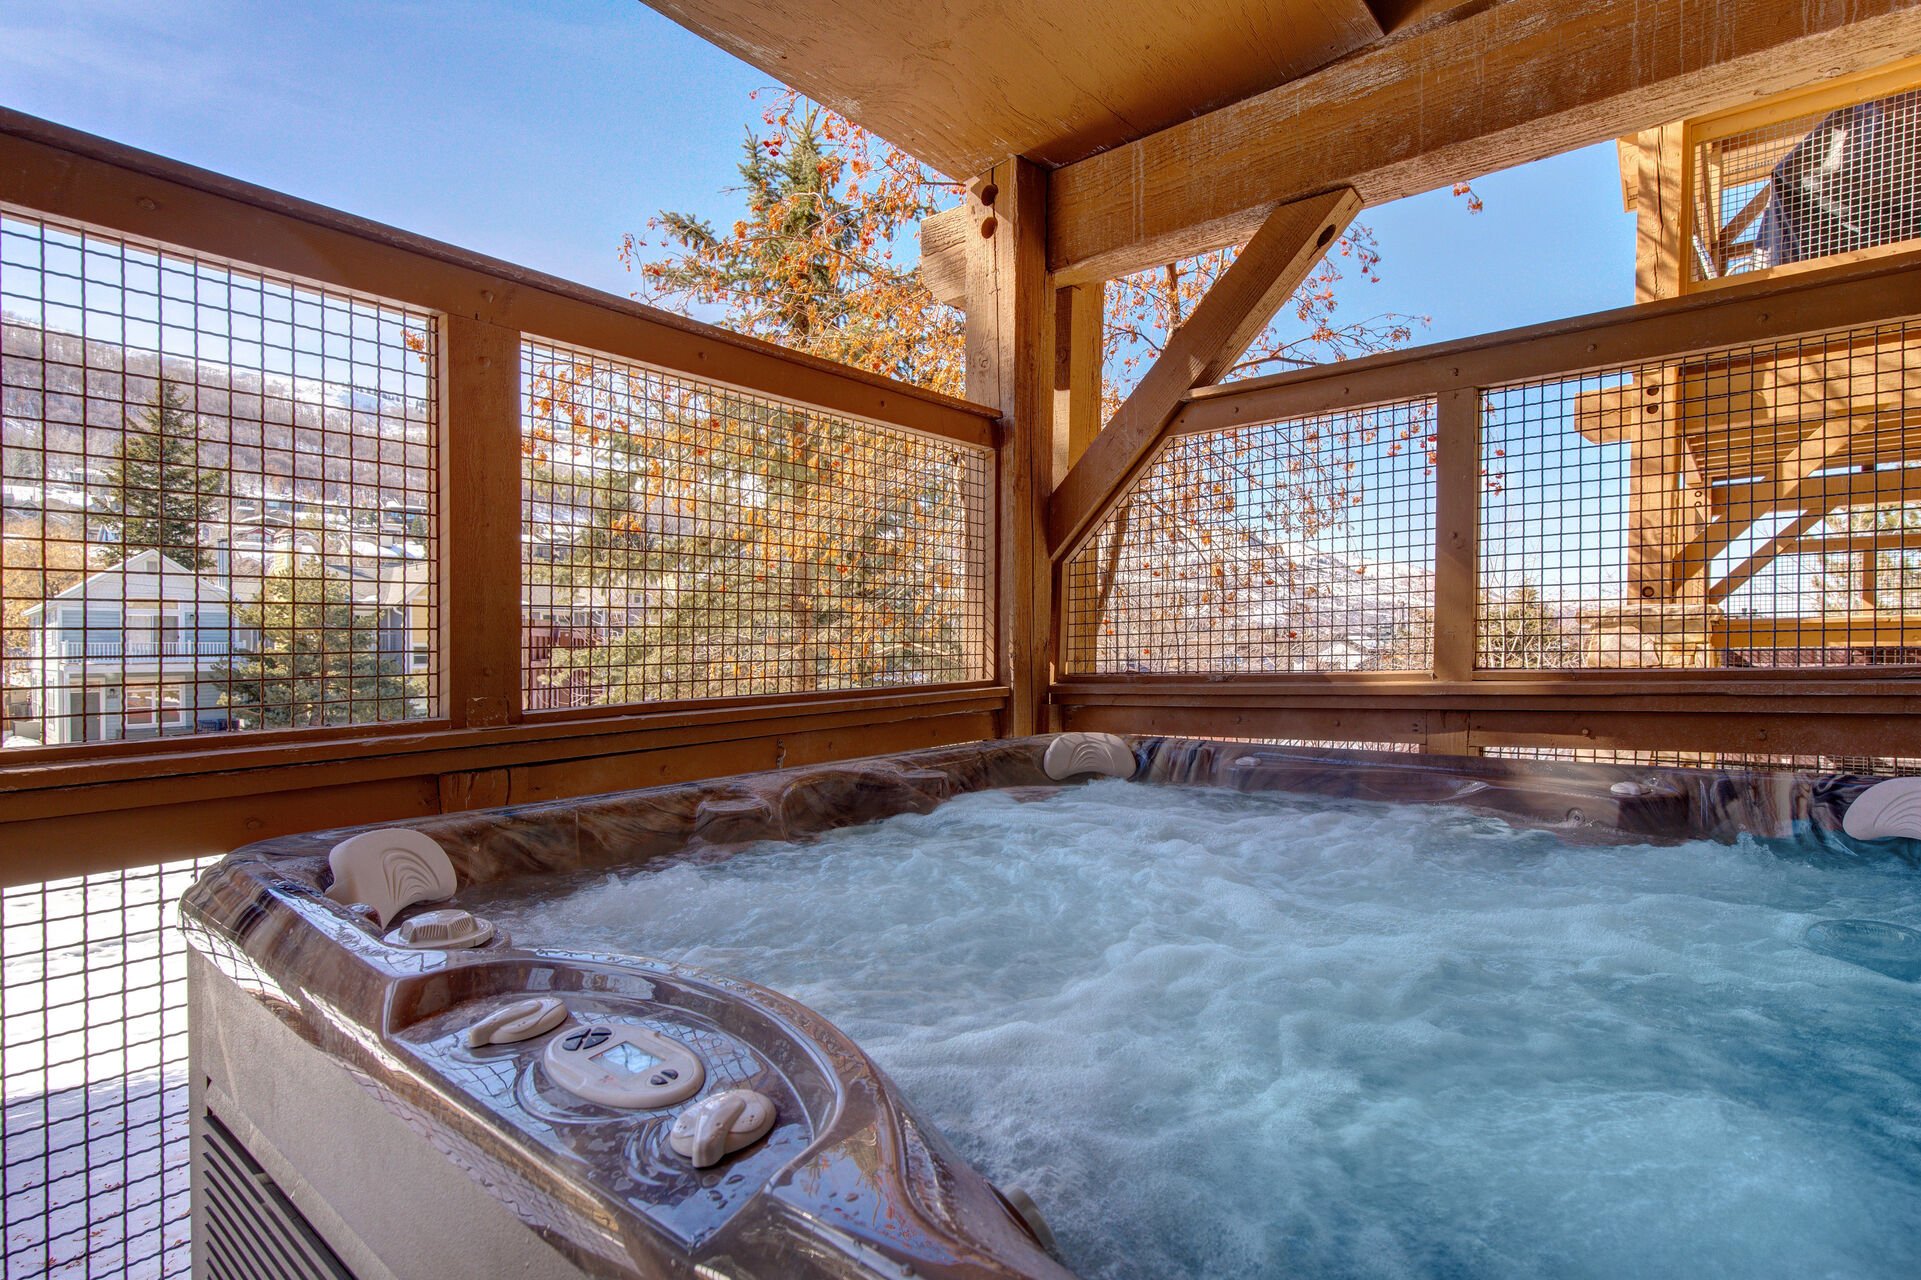 Private Patio with hot tub, bbq grill, and stunning views of surrounding Old Town Park CIty